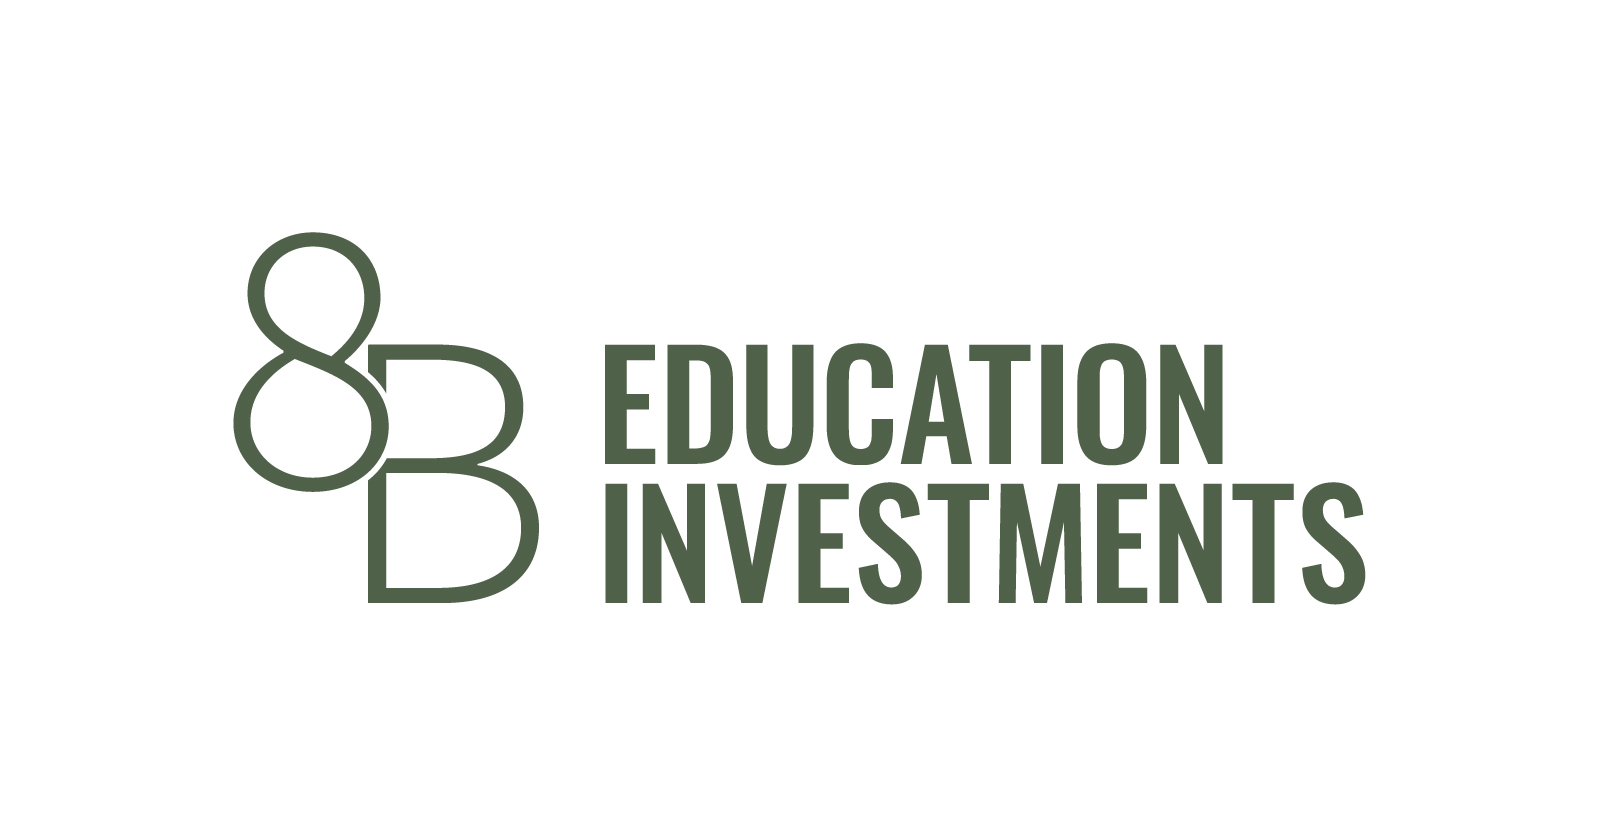 8B Education Investments